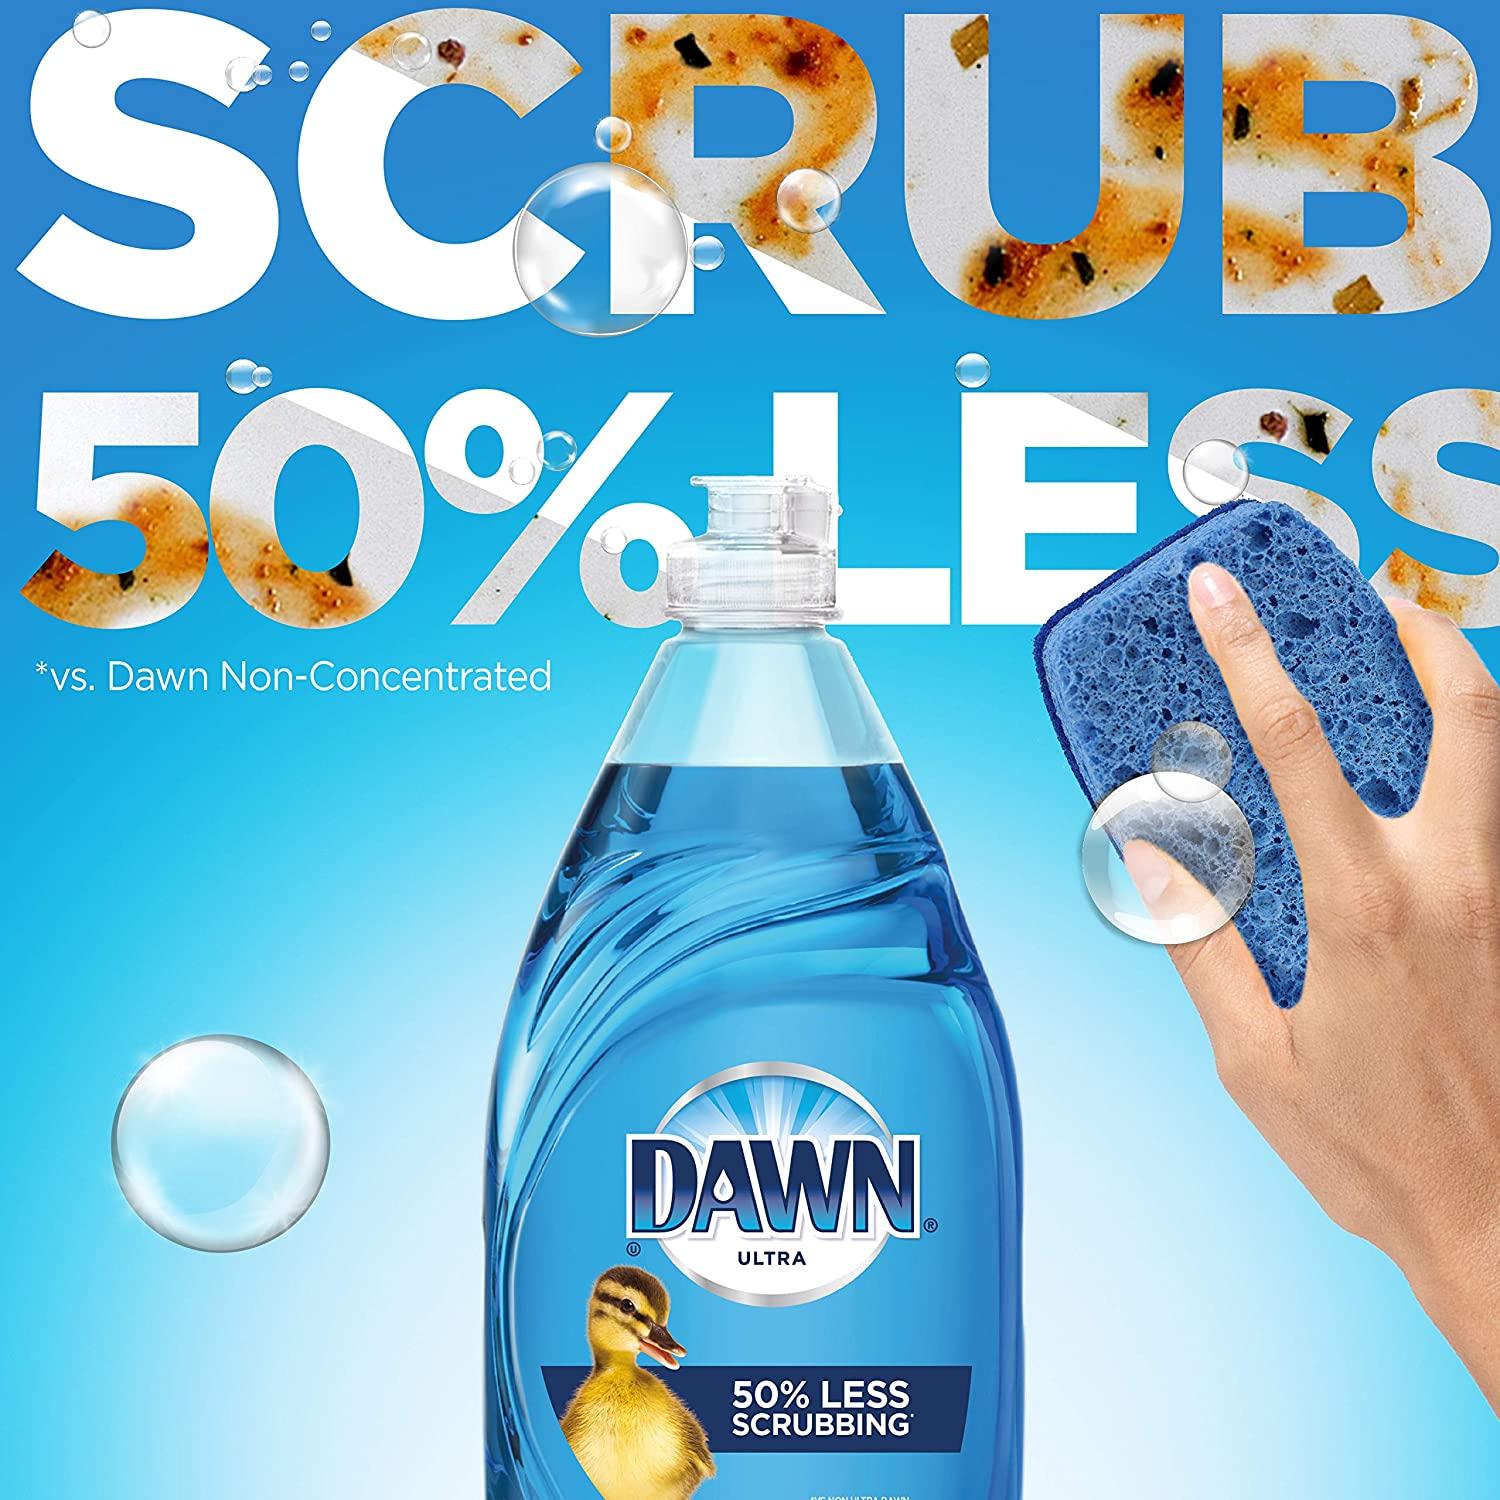 Dawn Dish Soap Royalty-Free Images, Stock Photos & Pictures